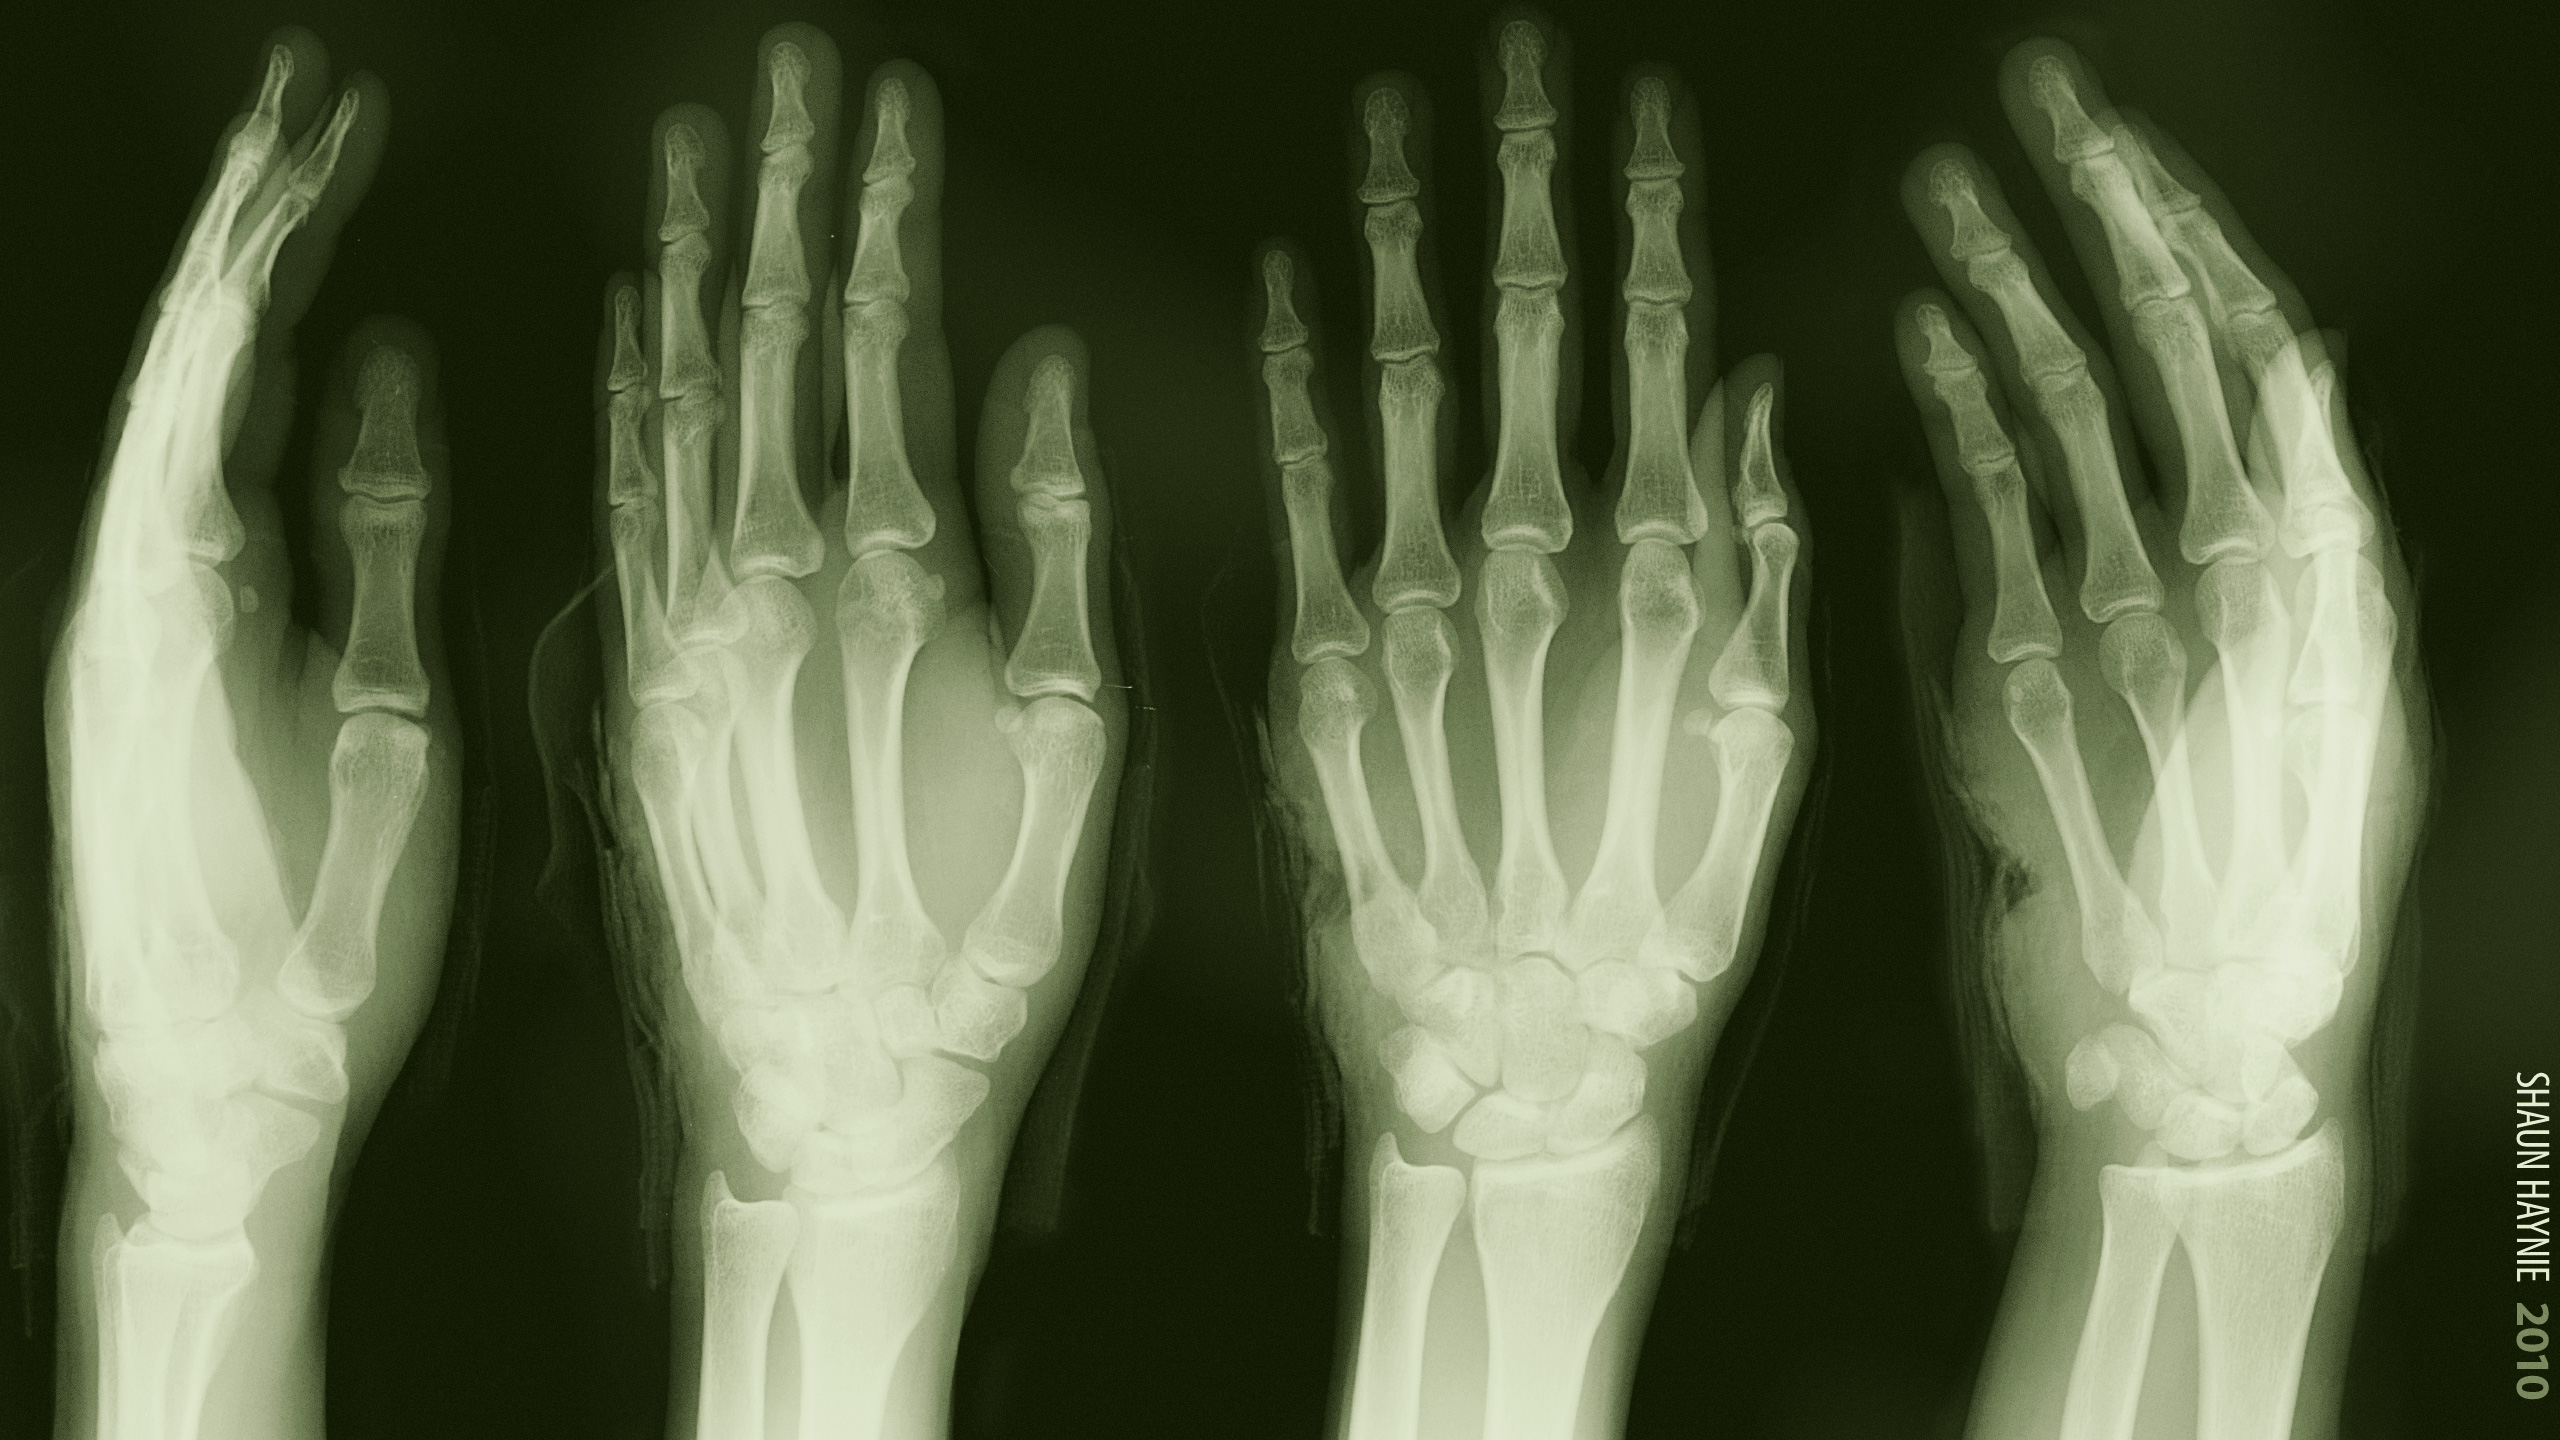 An X-ray of a hand showing a medical injury.